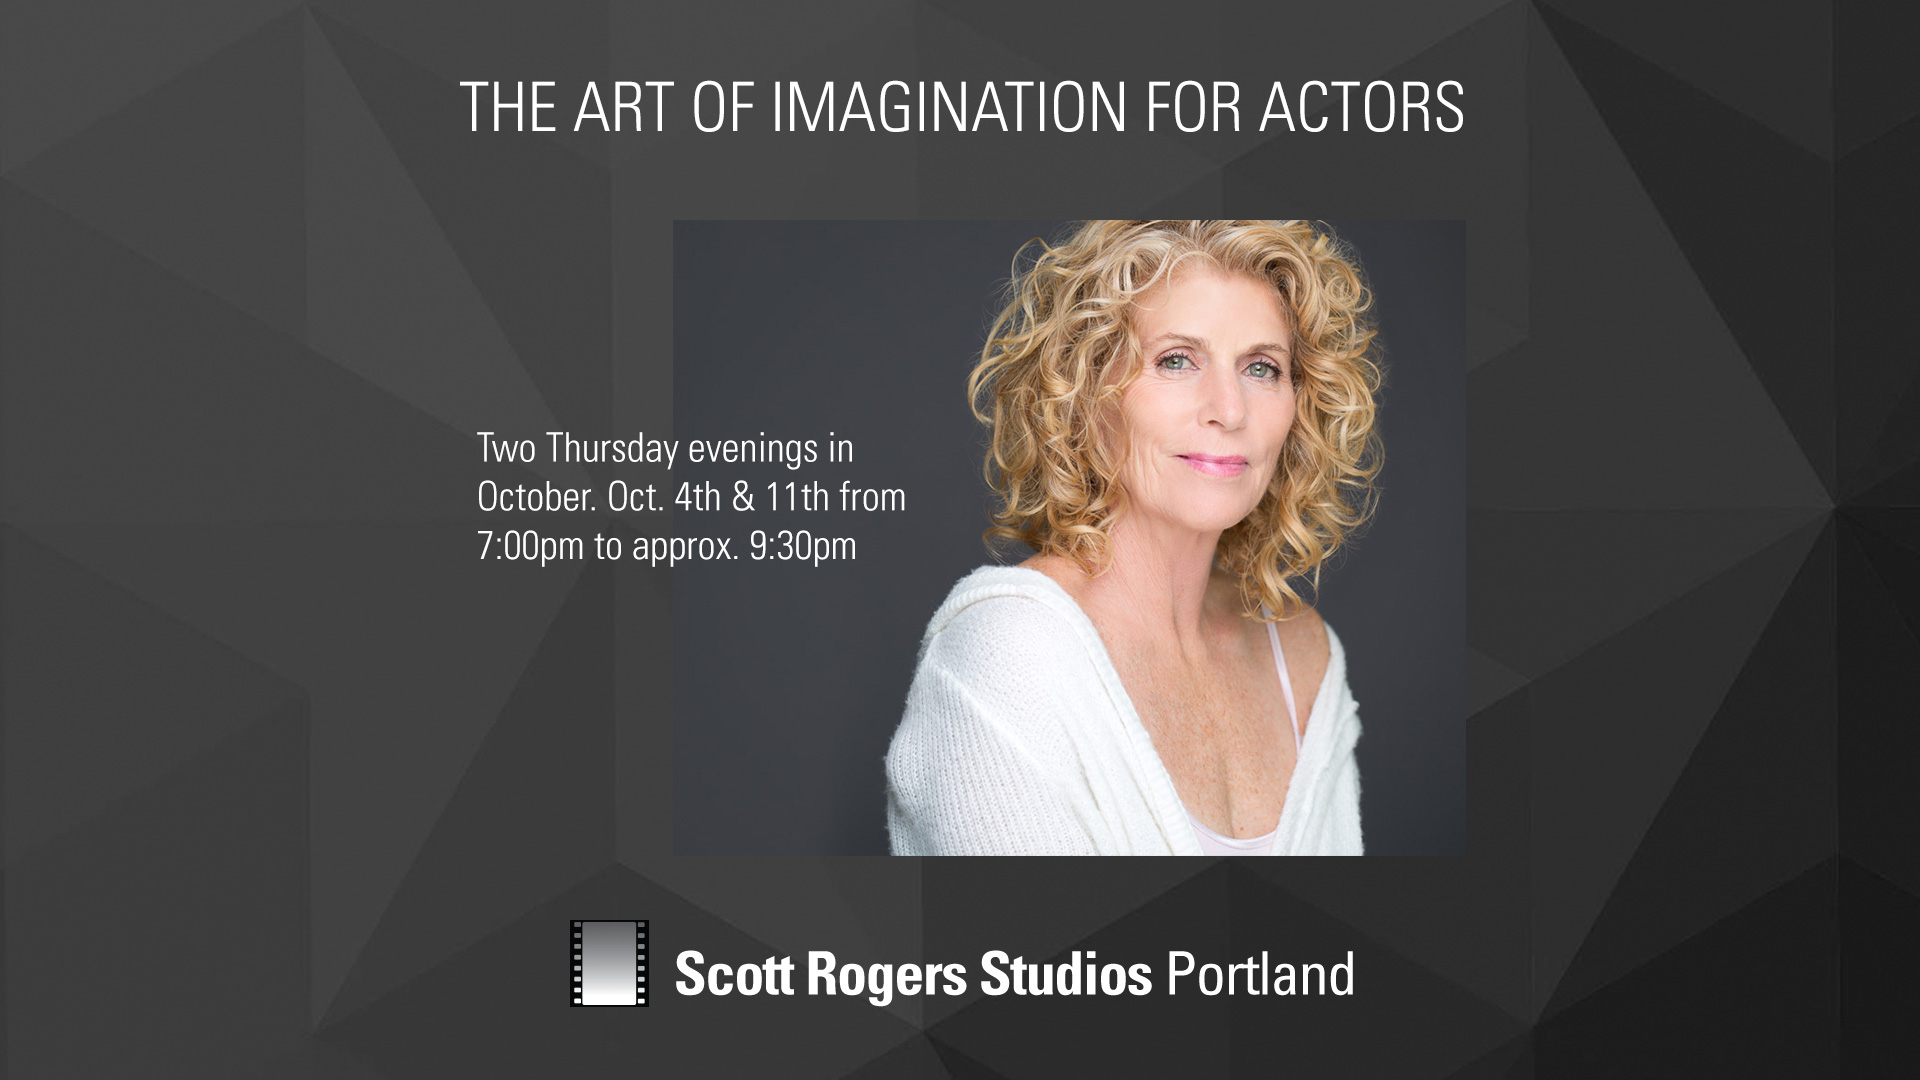 The Art of Imagination for Actors